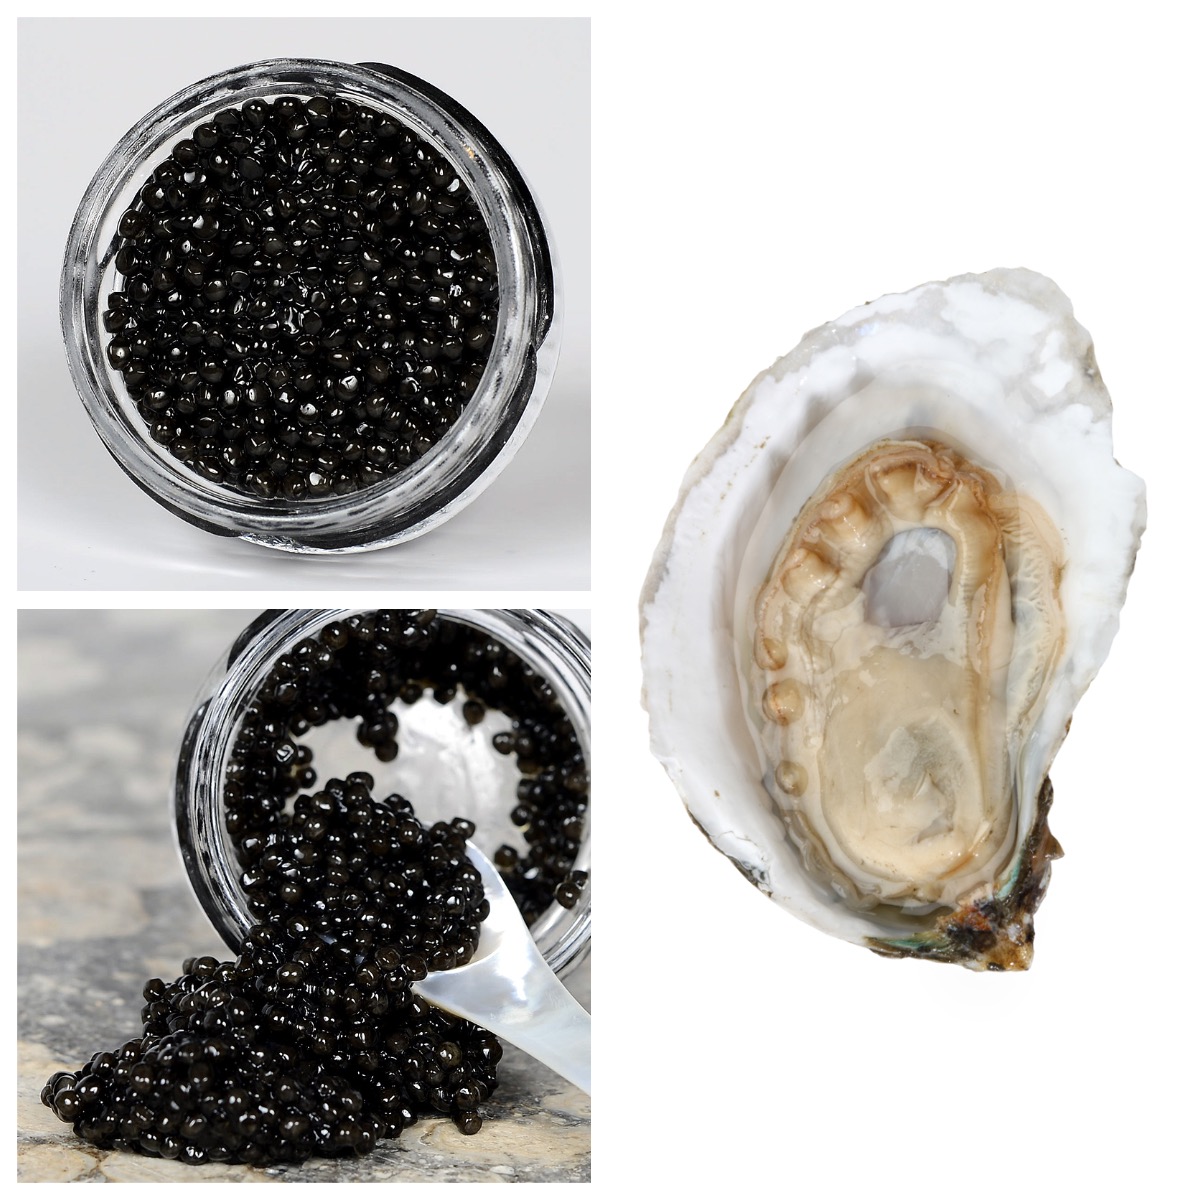 Buy fresh oysters online from Loch Fyne - the finest oysters from Scotland